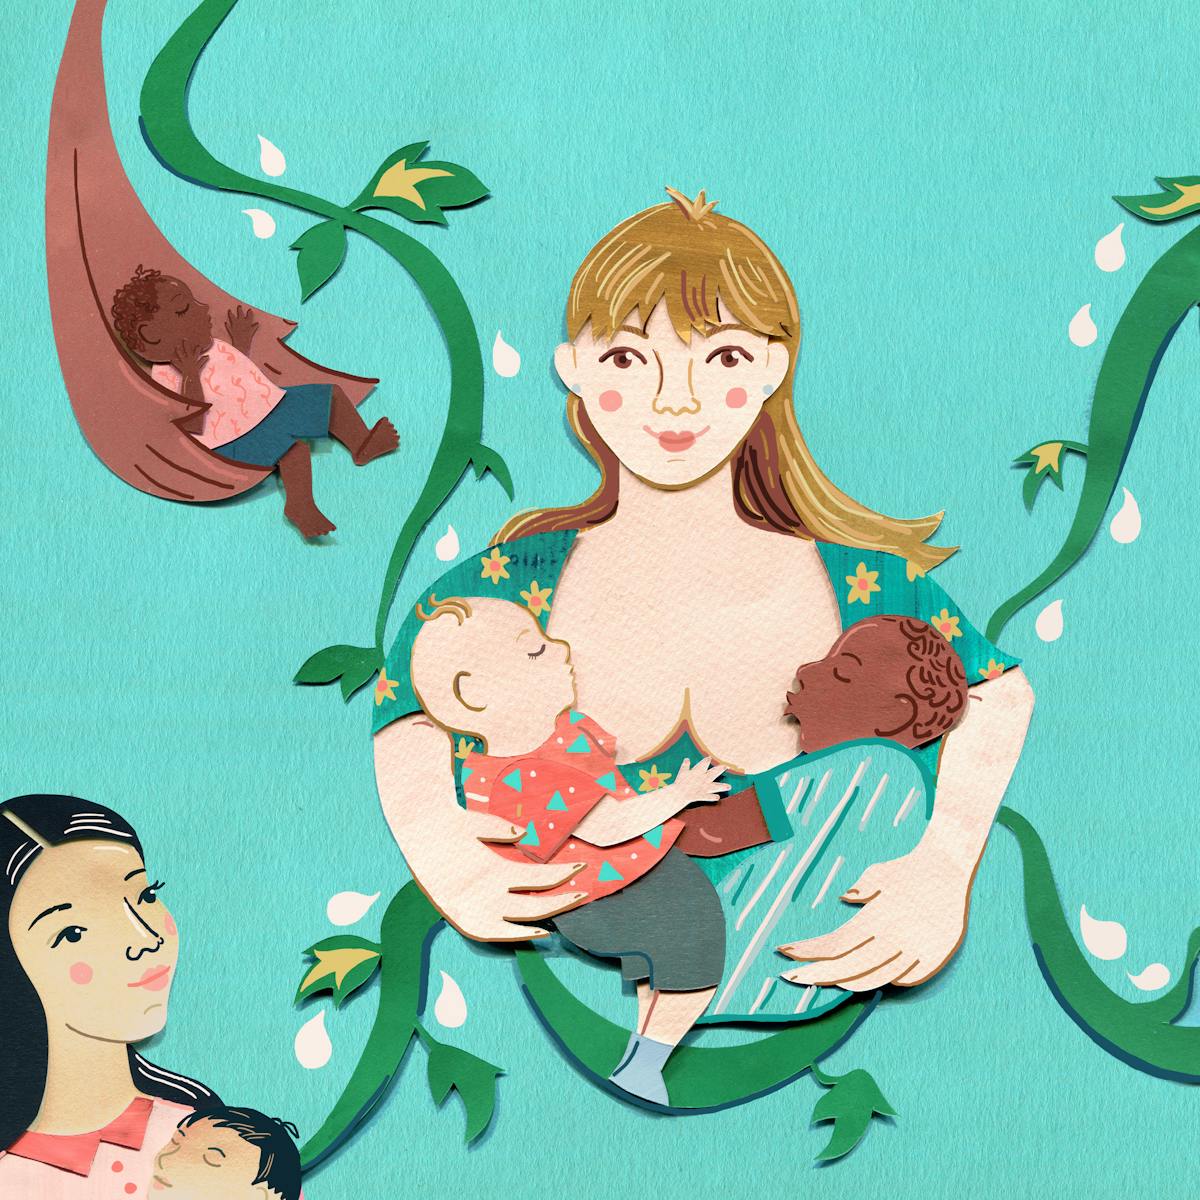 A mixed media illustration depicting mothers of differing ethnicities breastfeeding children. The mothers are connected by green vines with milk droplets around them. 